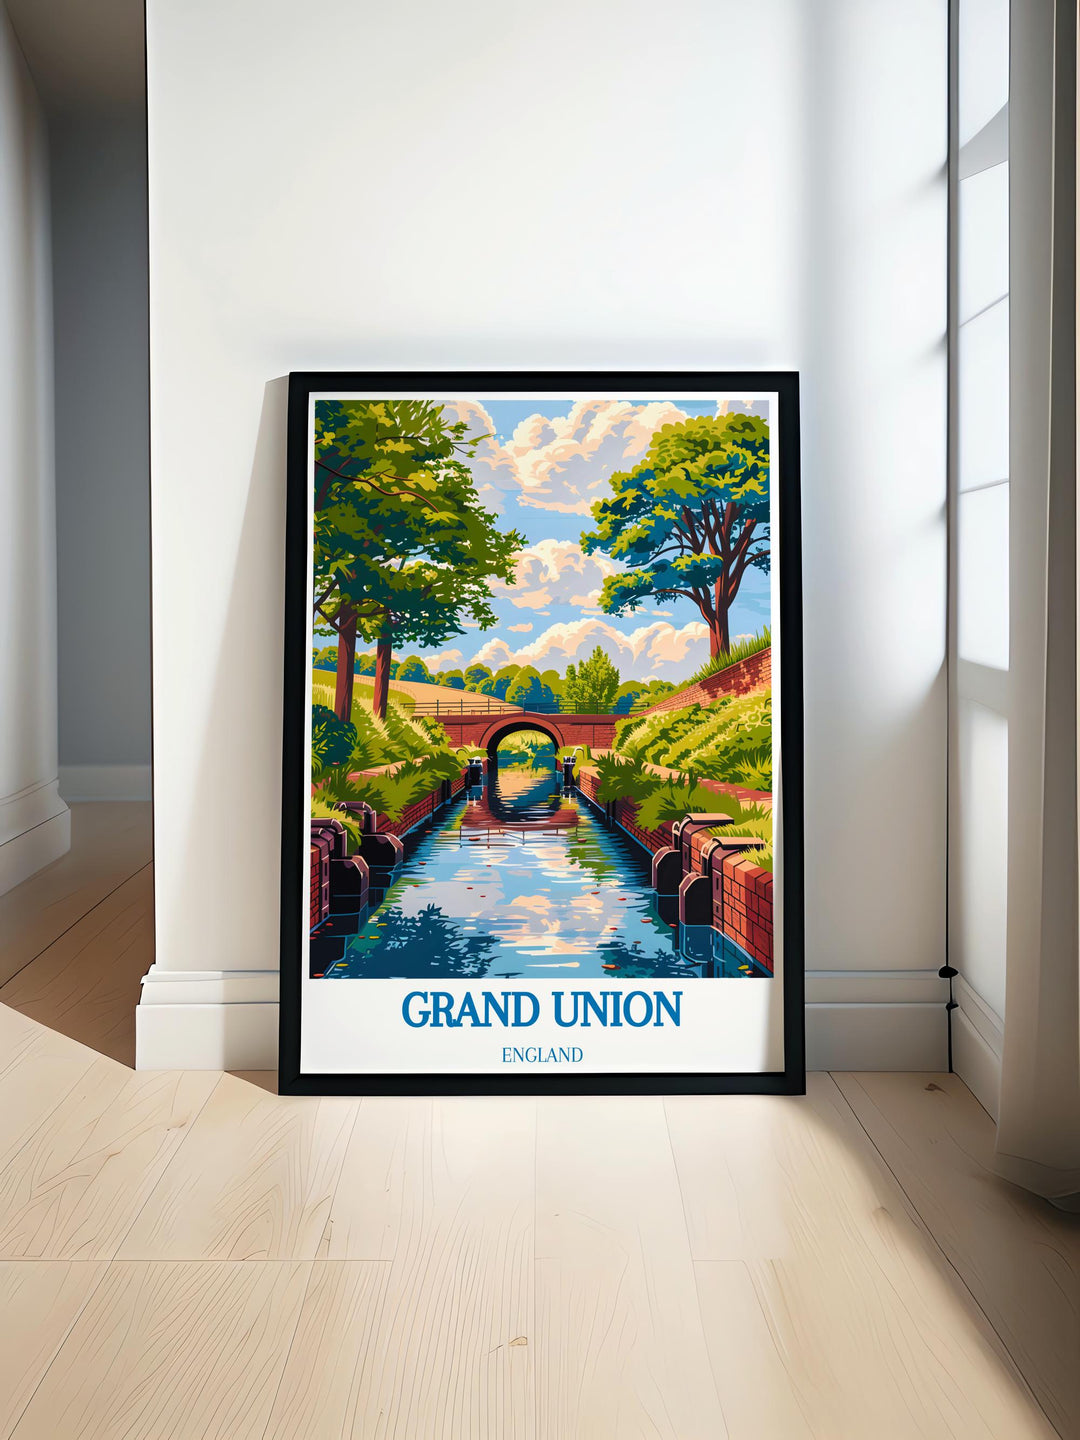 Detailed illustration of the Grand Union Canal framed by lush greenery in Cassiobury Park, featuring colorful narrowboats, perfect for boating and canal enthusiasts.